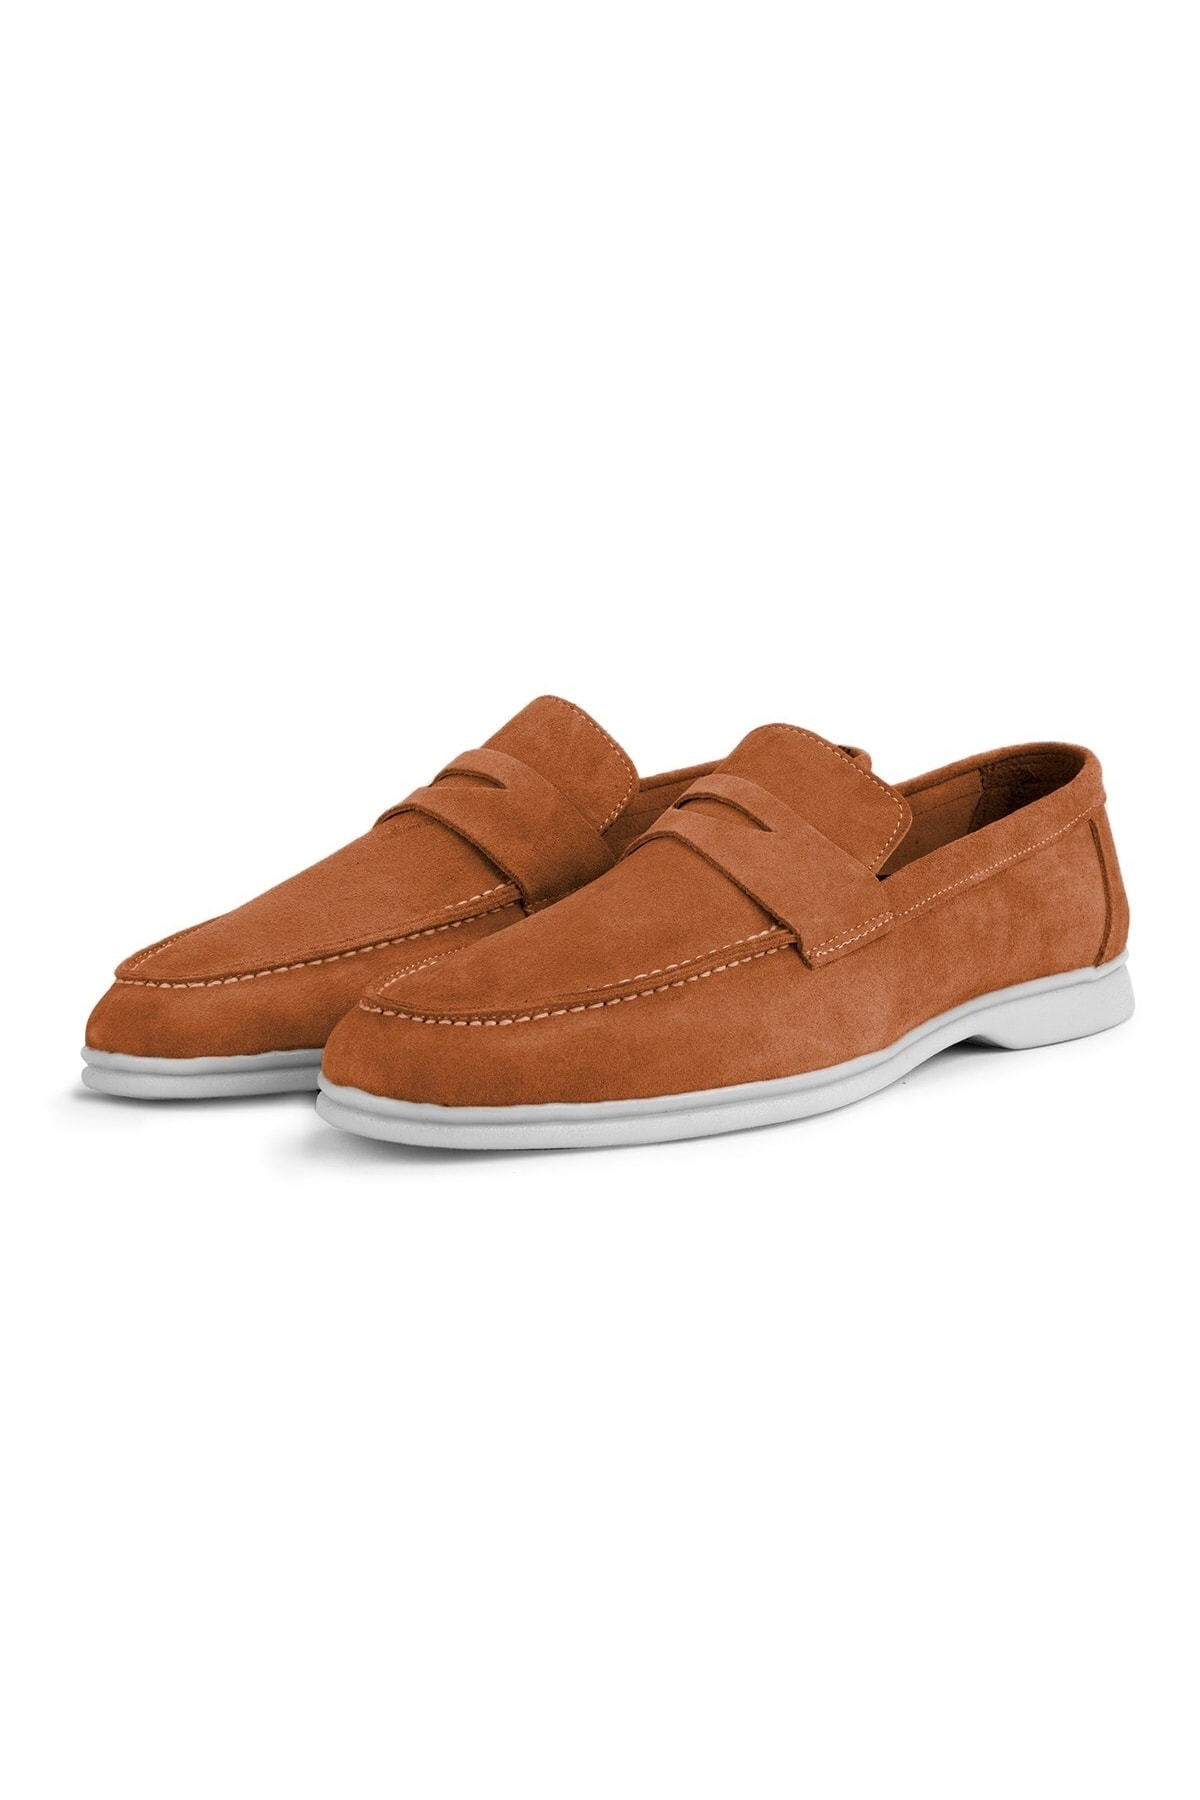 Levně Ducavelli Ante Suede Genuine Leather Men's Casual Shoes Loafer Shoes Tan